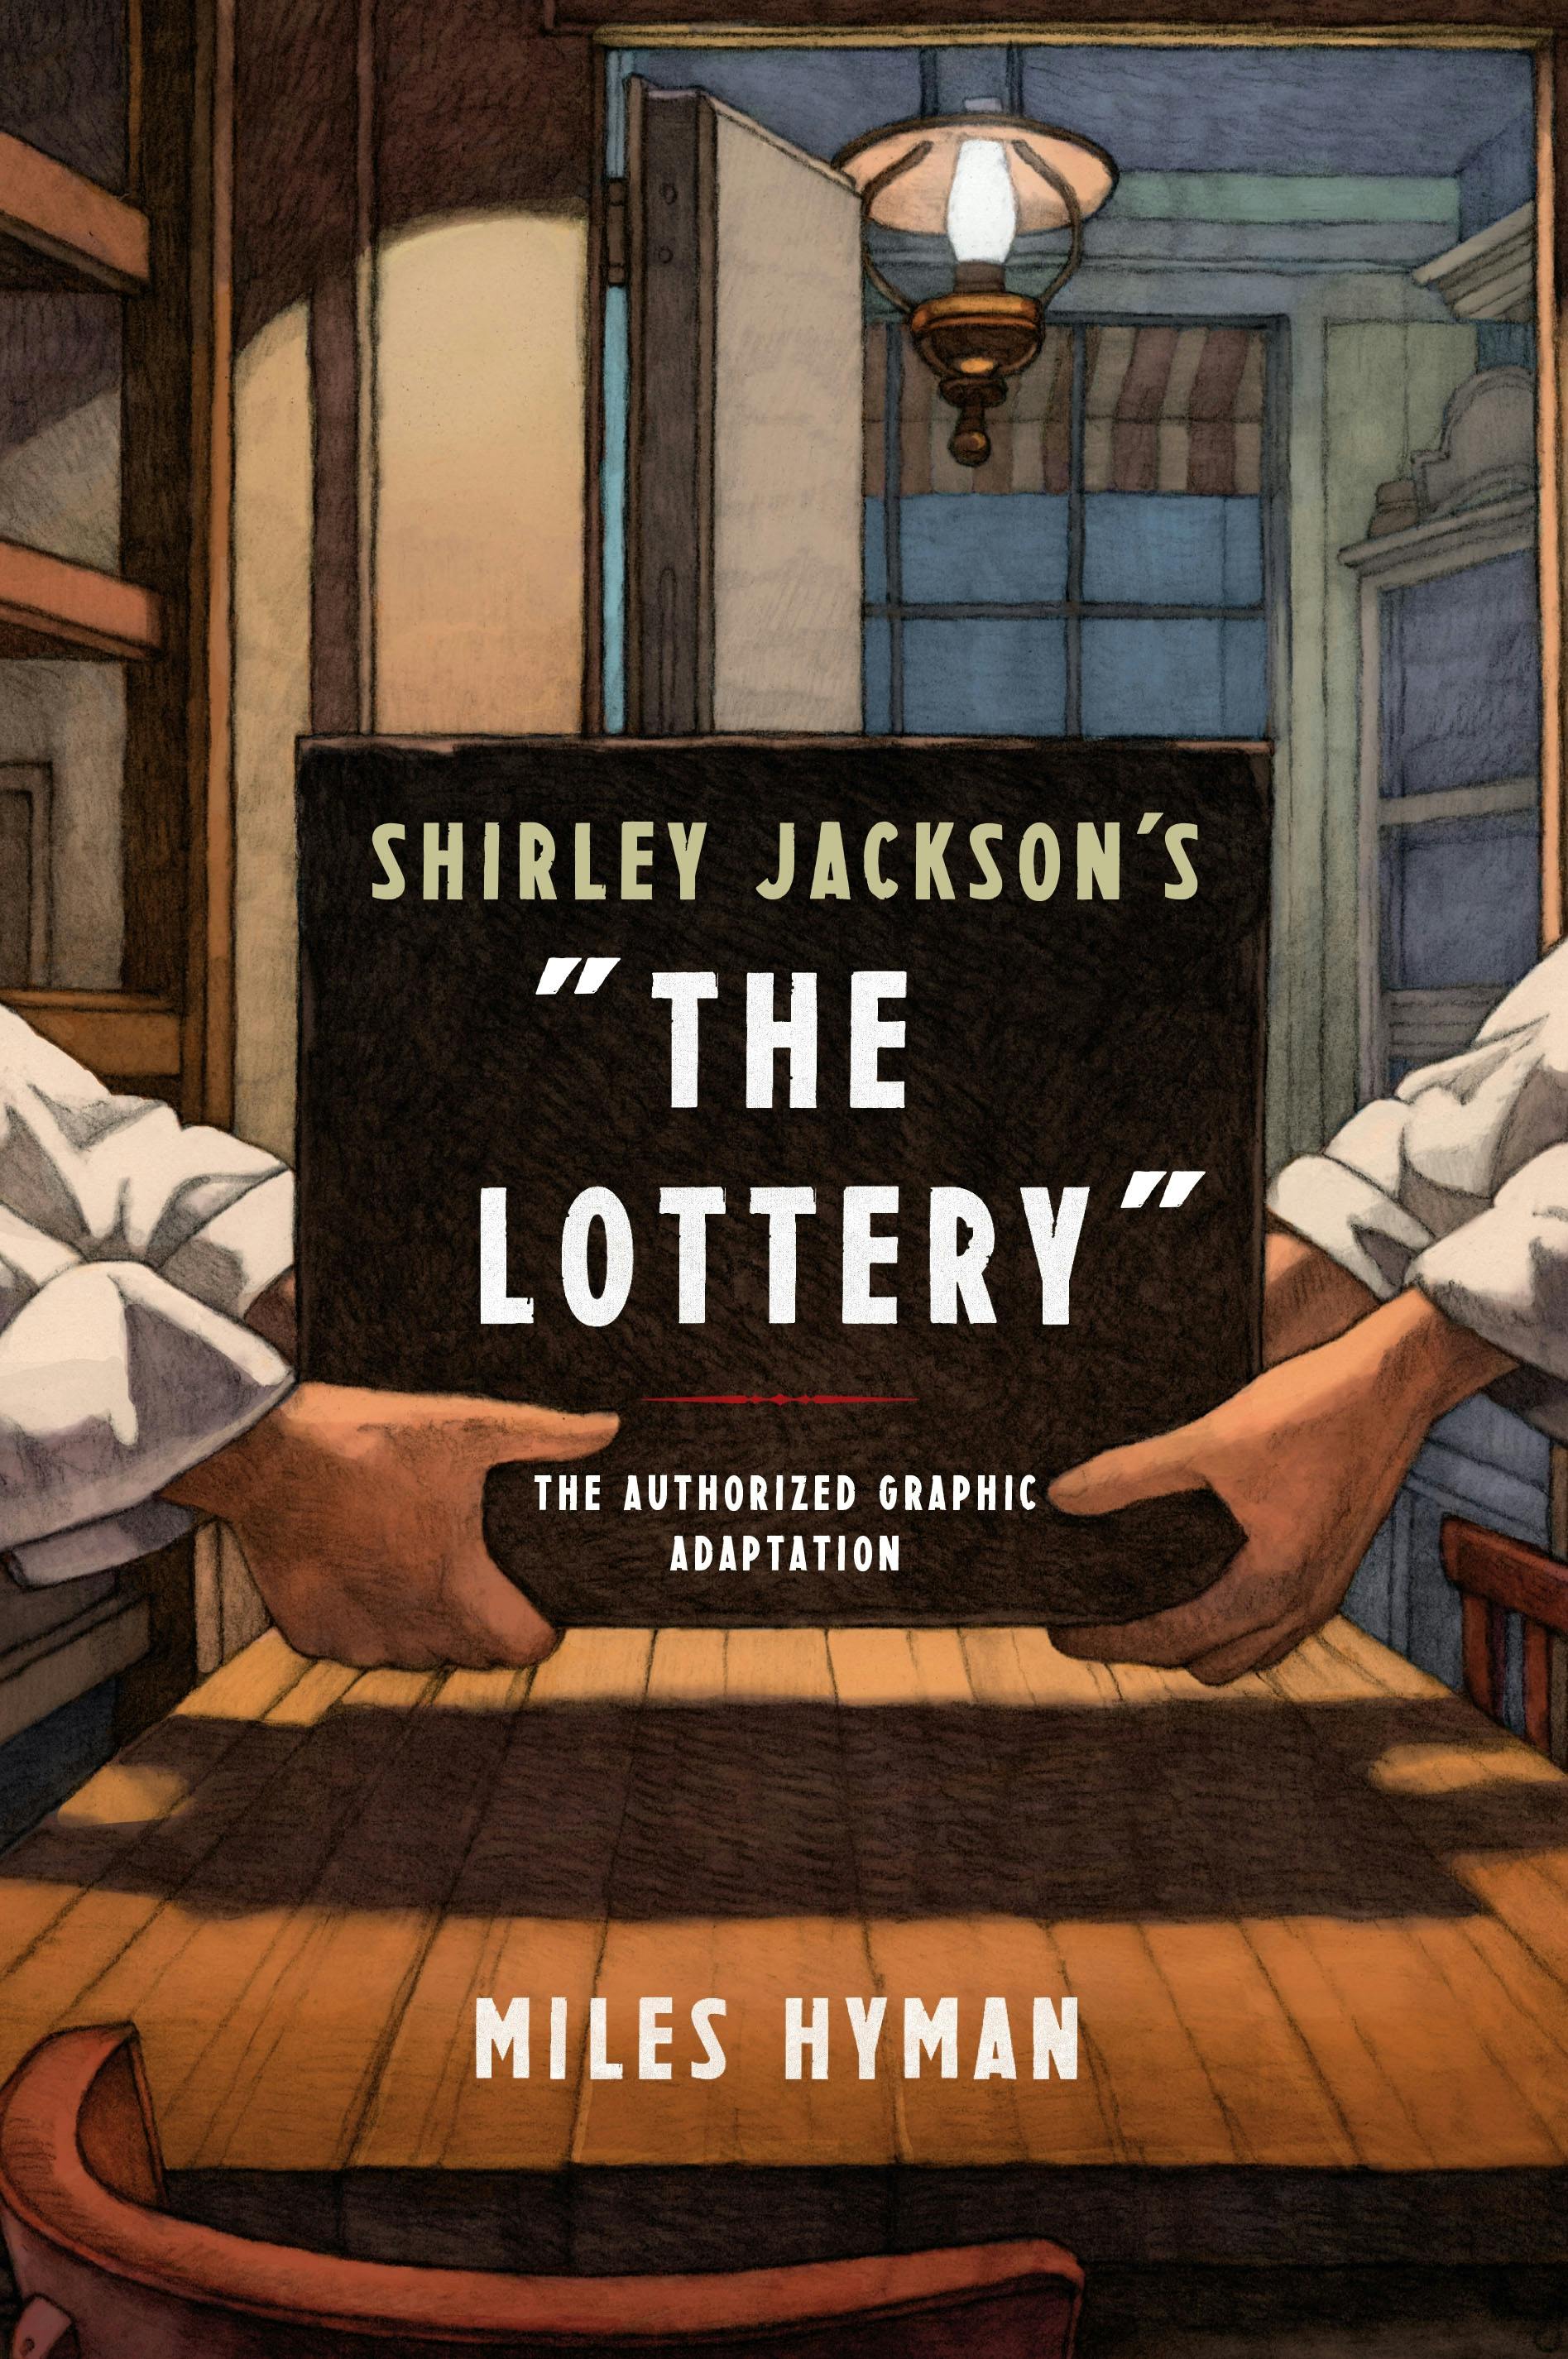 the lottery by shirley jackson literary analysis essay